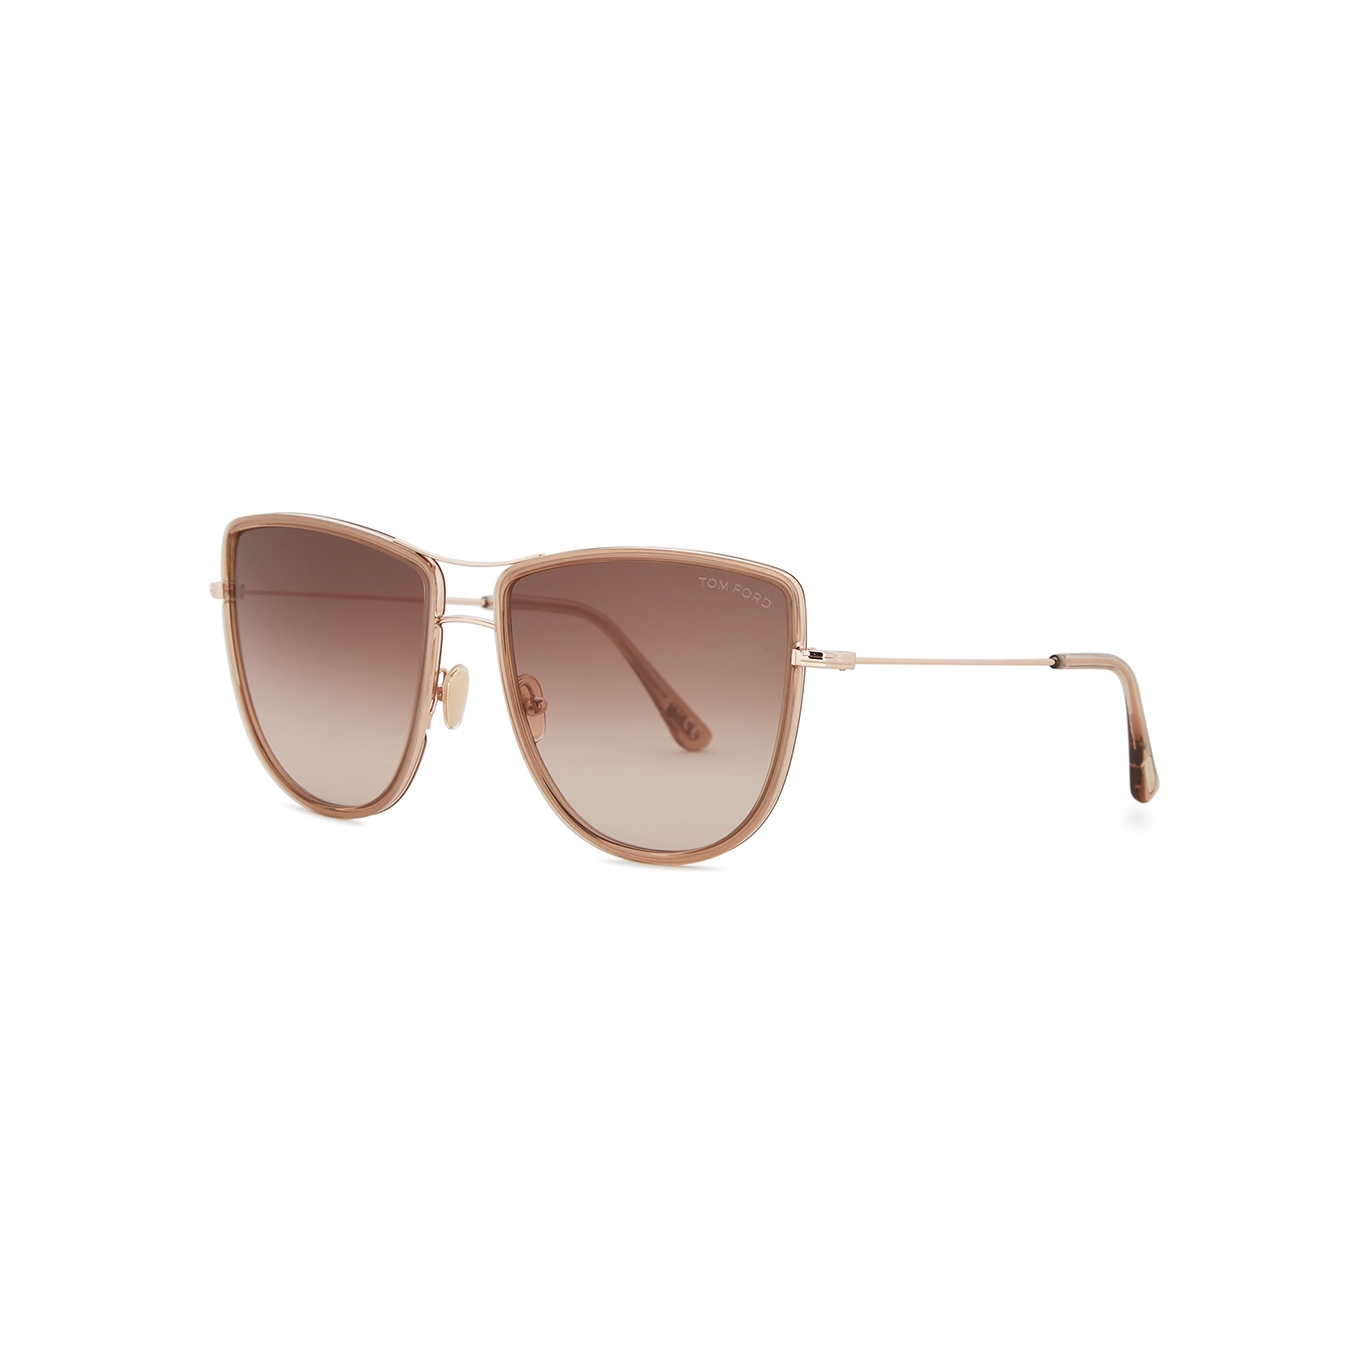 Tom Ford Tina Rose Gold-tone Oversized Sunglasses - Brown